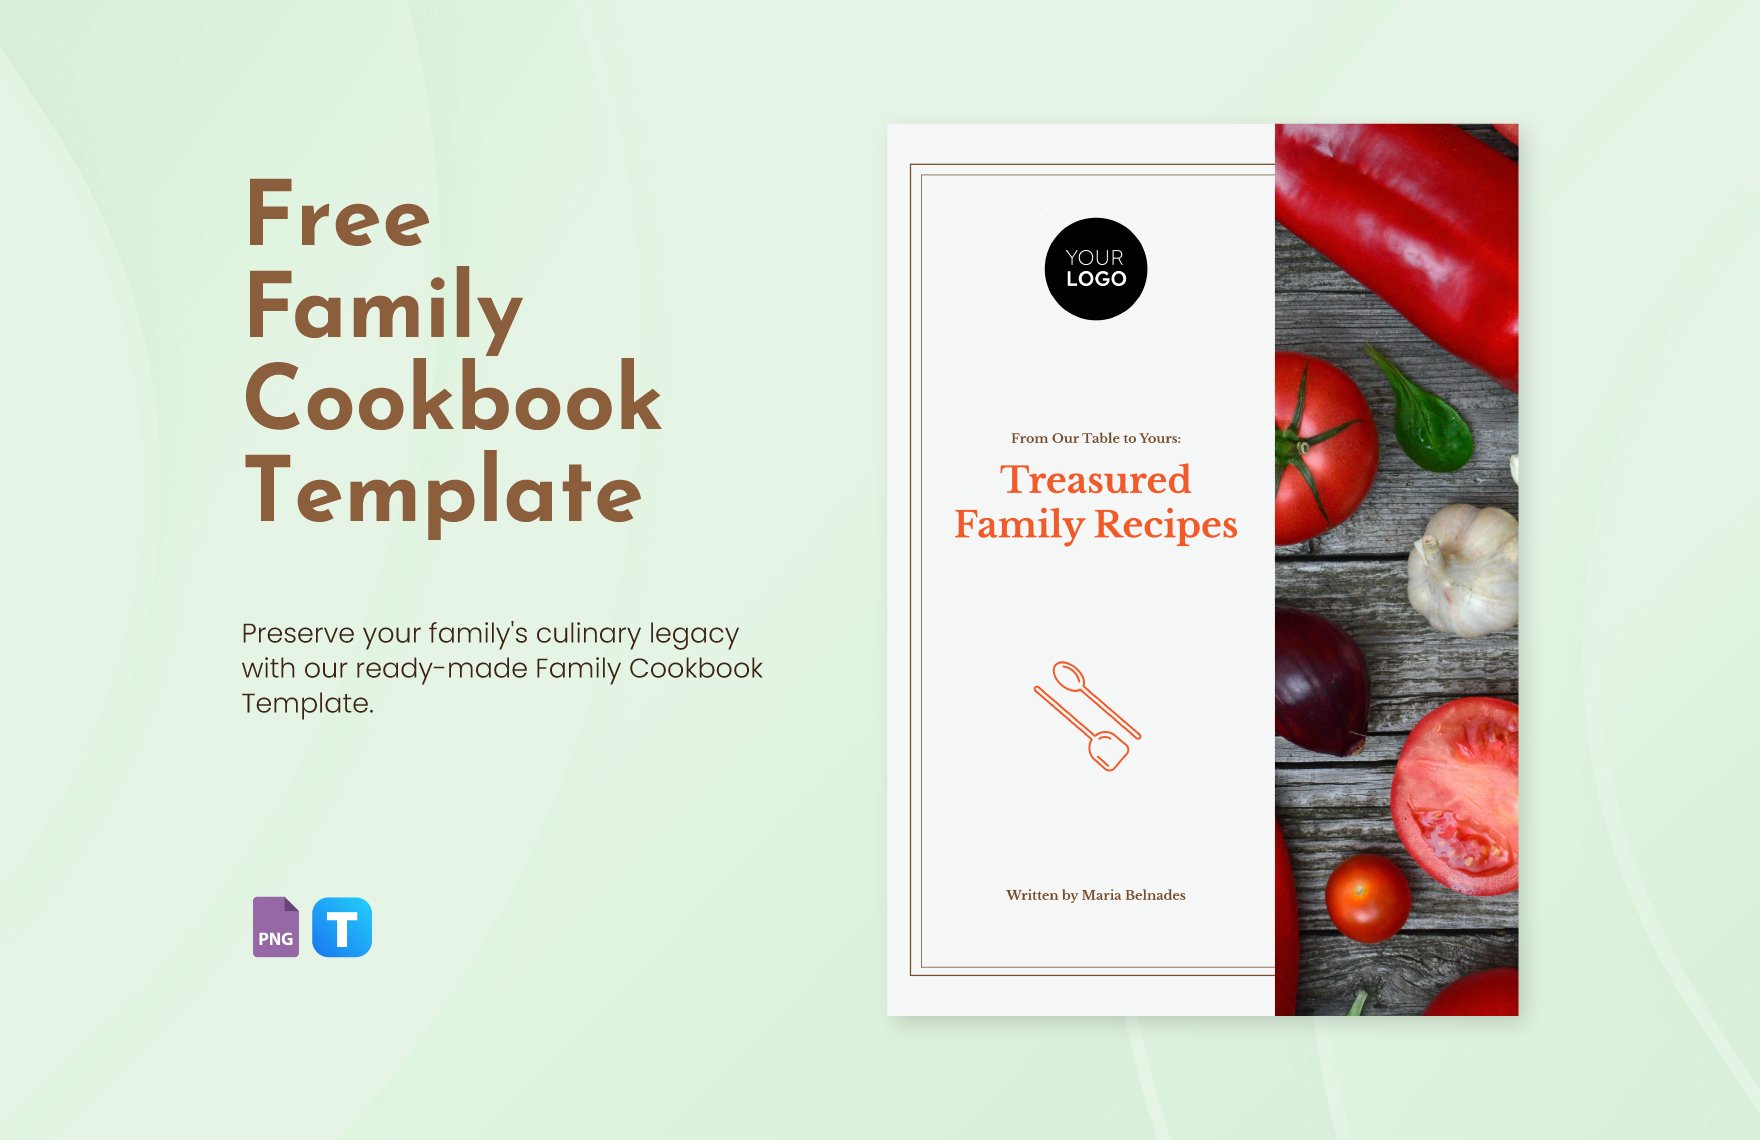 Free Family Cookbook Template